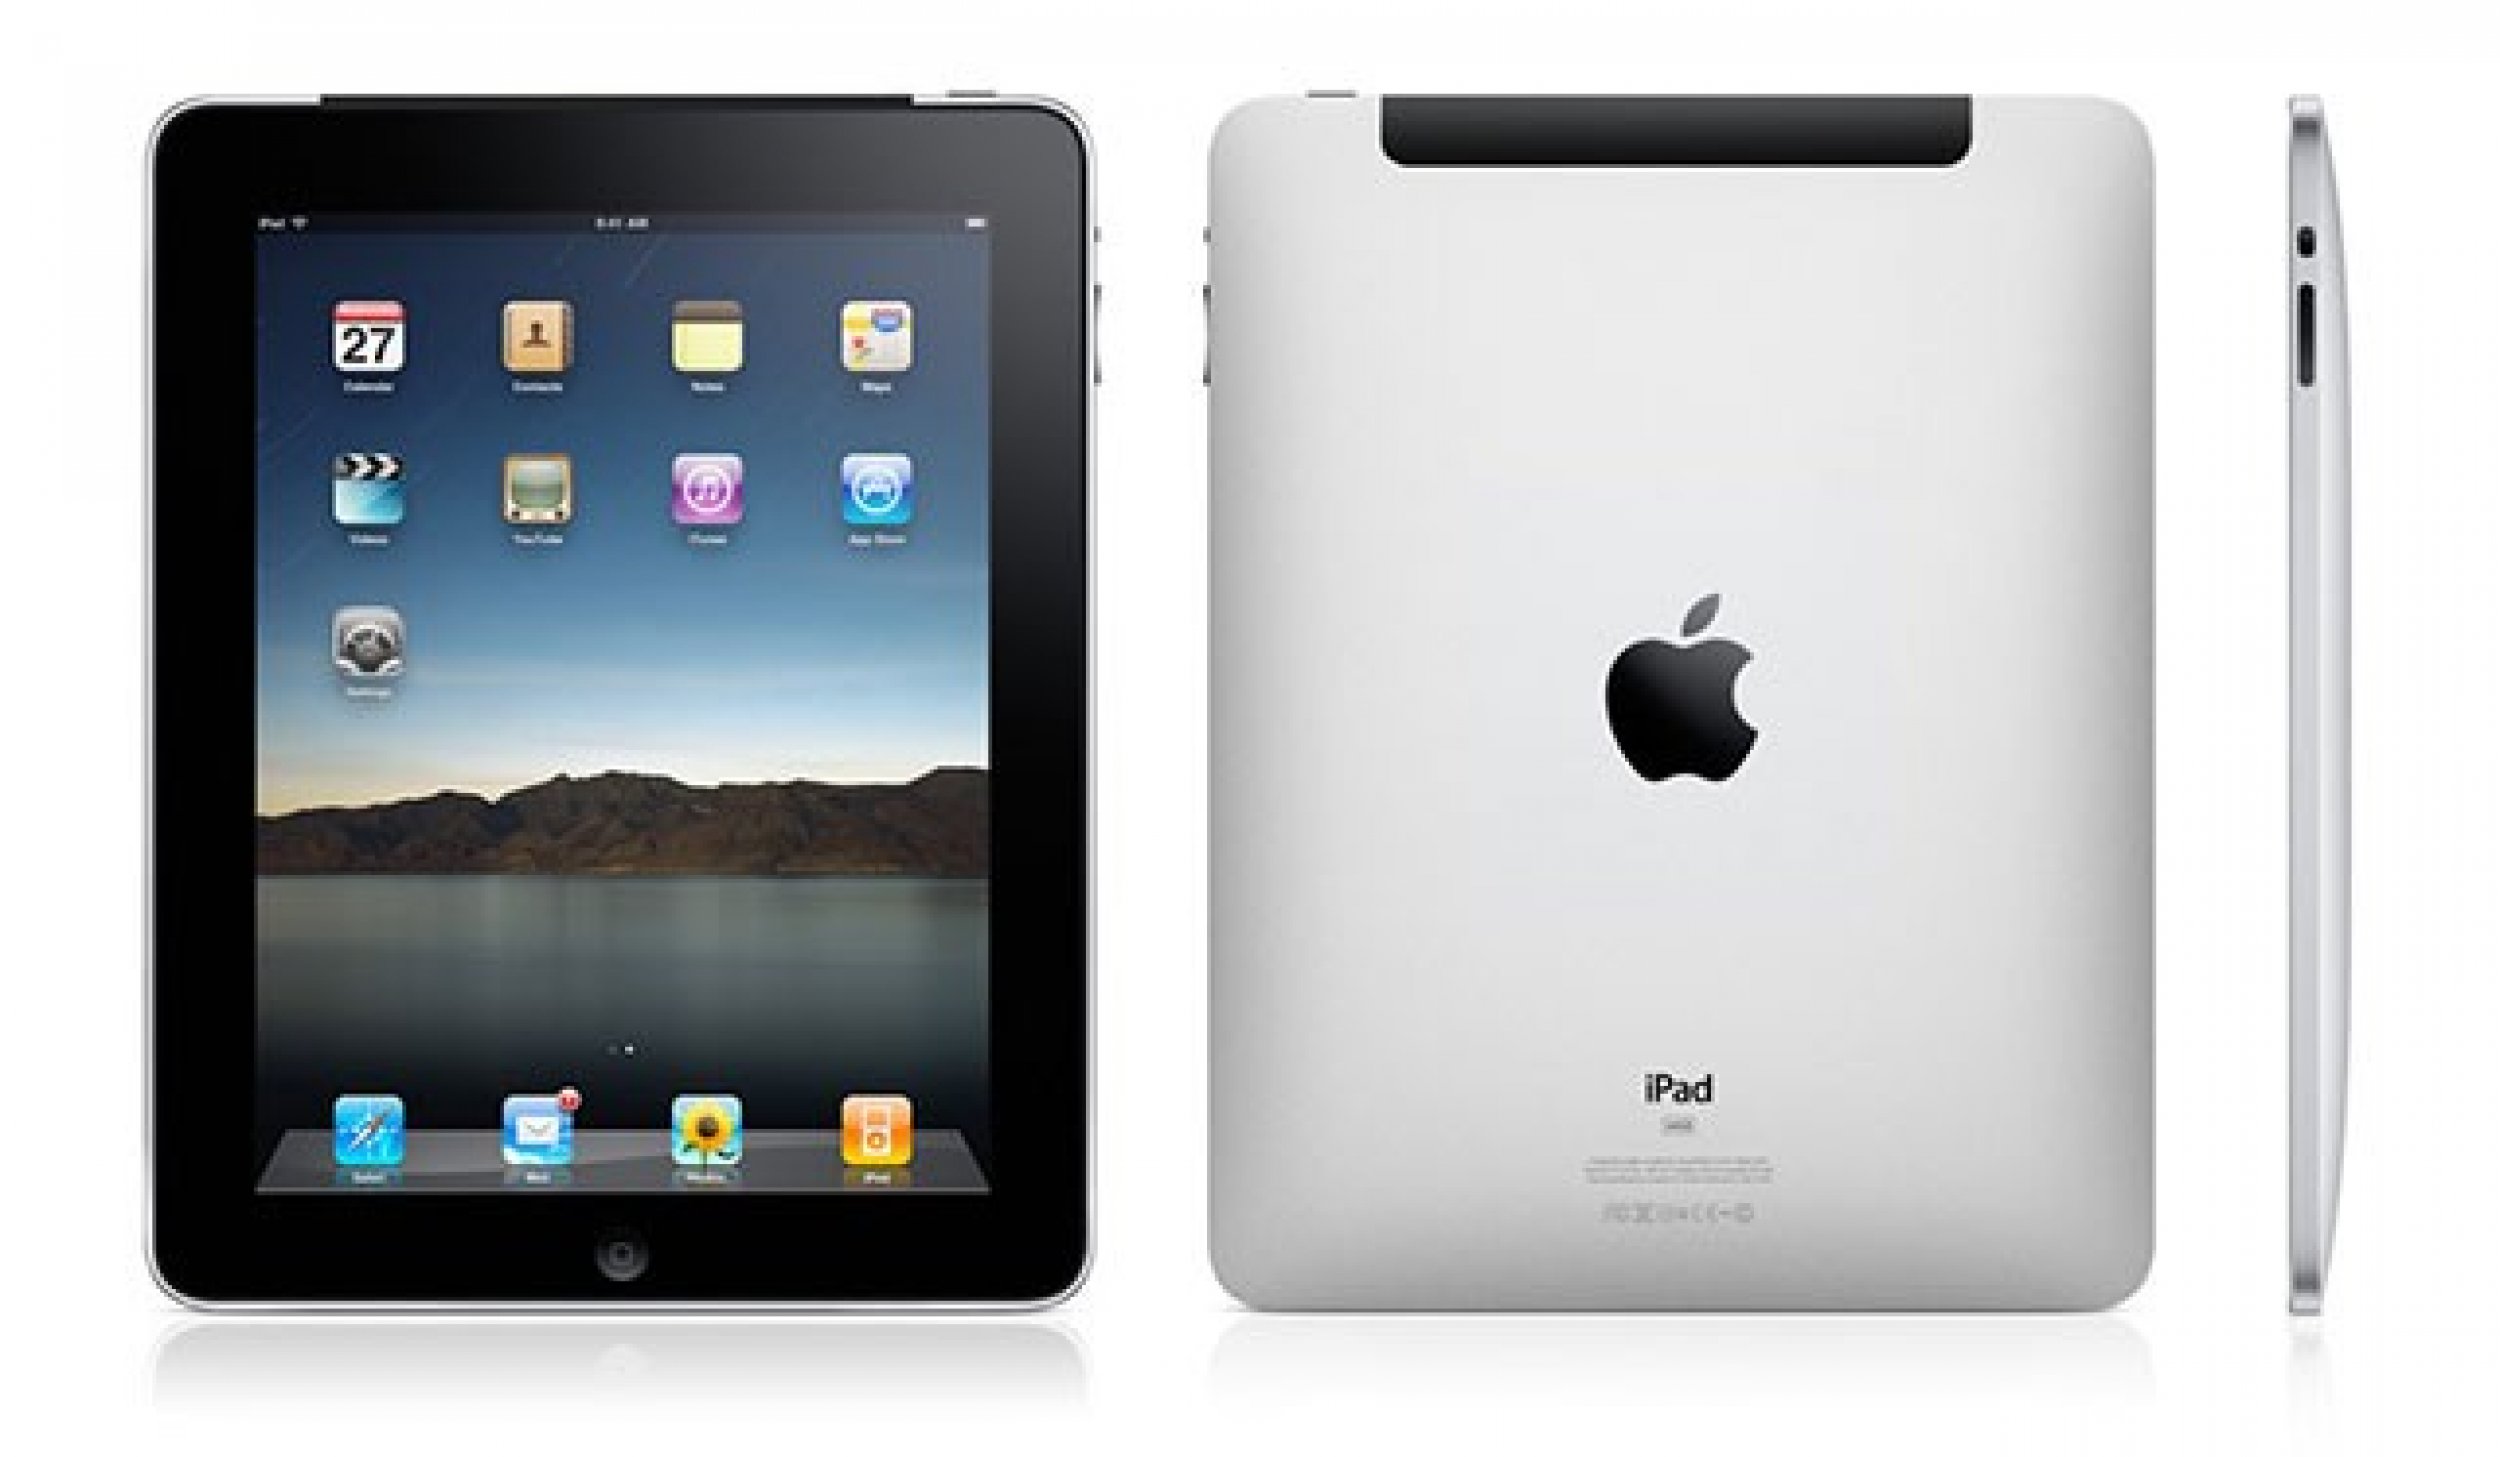 What Rumors Are True About the iPad 3 